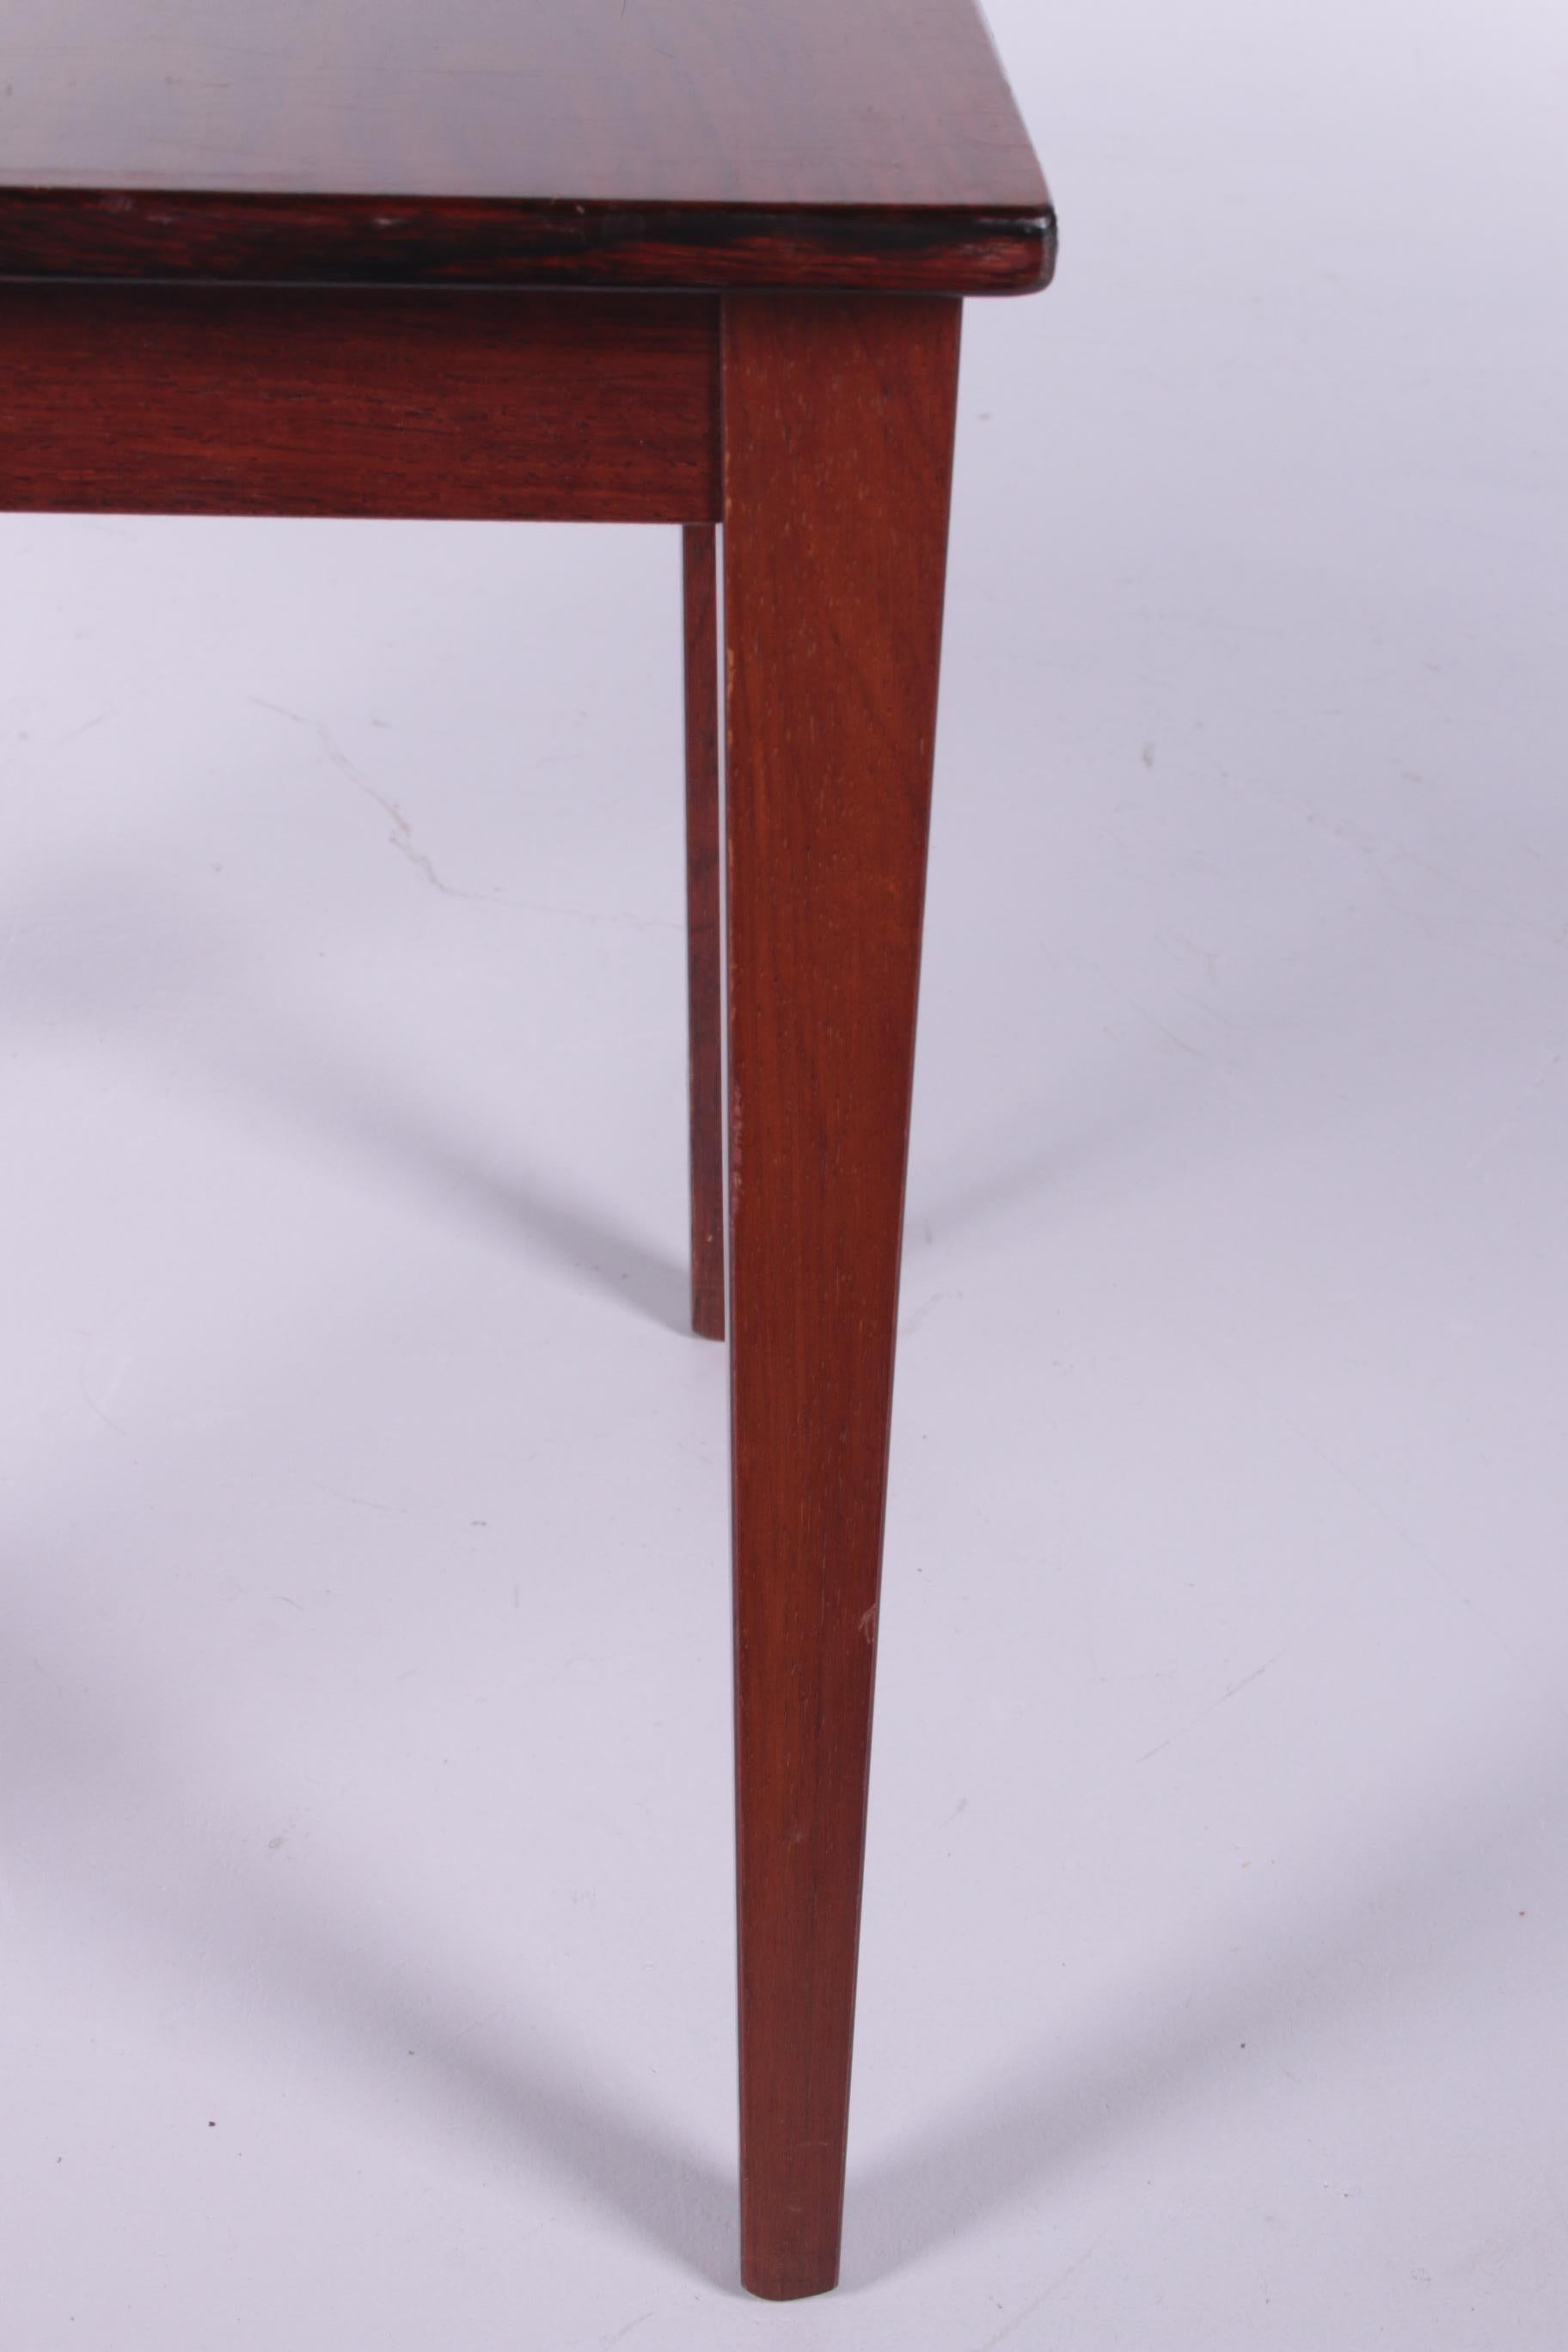 Wood Darkwood Side Table from Denmark, 1960s For Sale